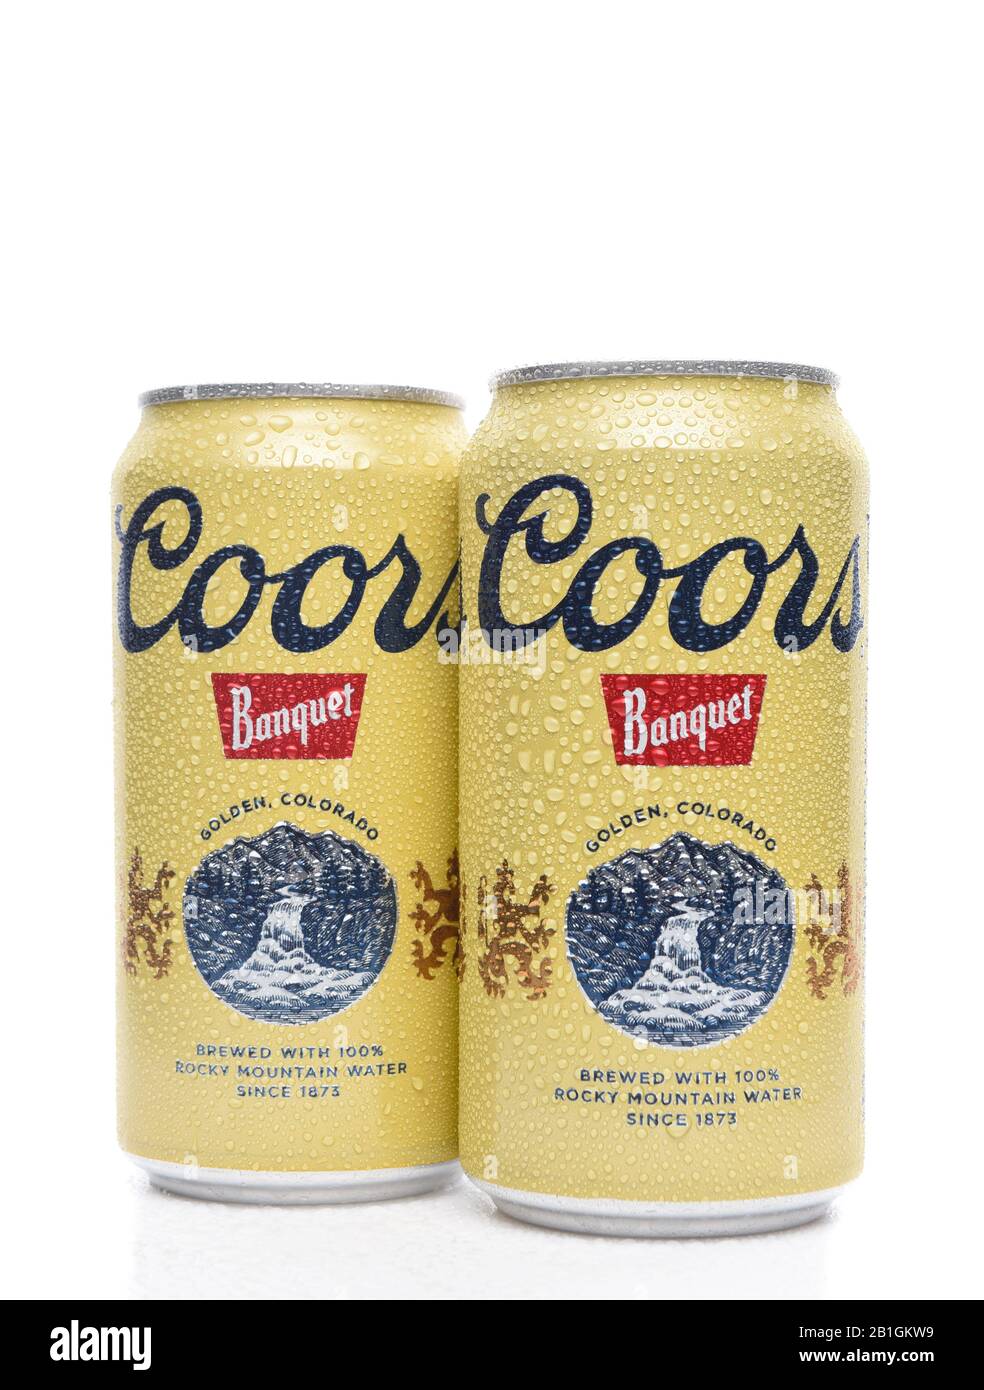 IRVINE, CALIFORNIA - AUGUST 19, 2019: 2 cans of Coors Banquet Beer with condensation. Brewed solely in Golden, Colorado with Rocky Mountain water and Stock Photo